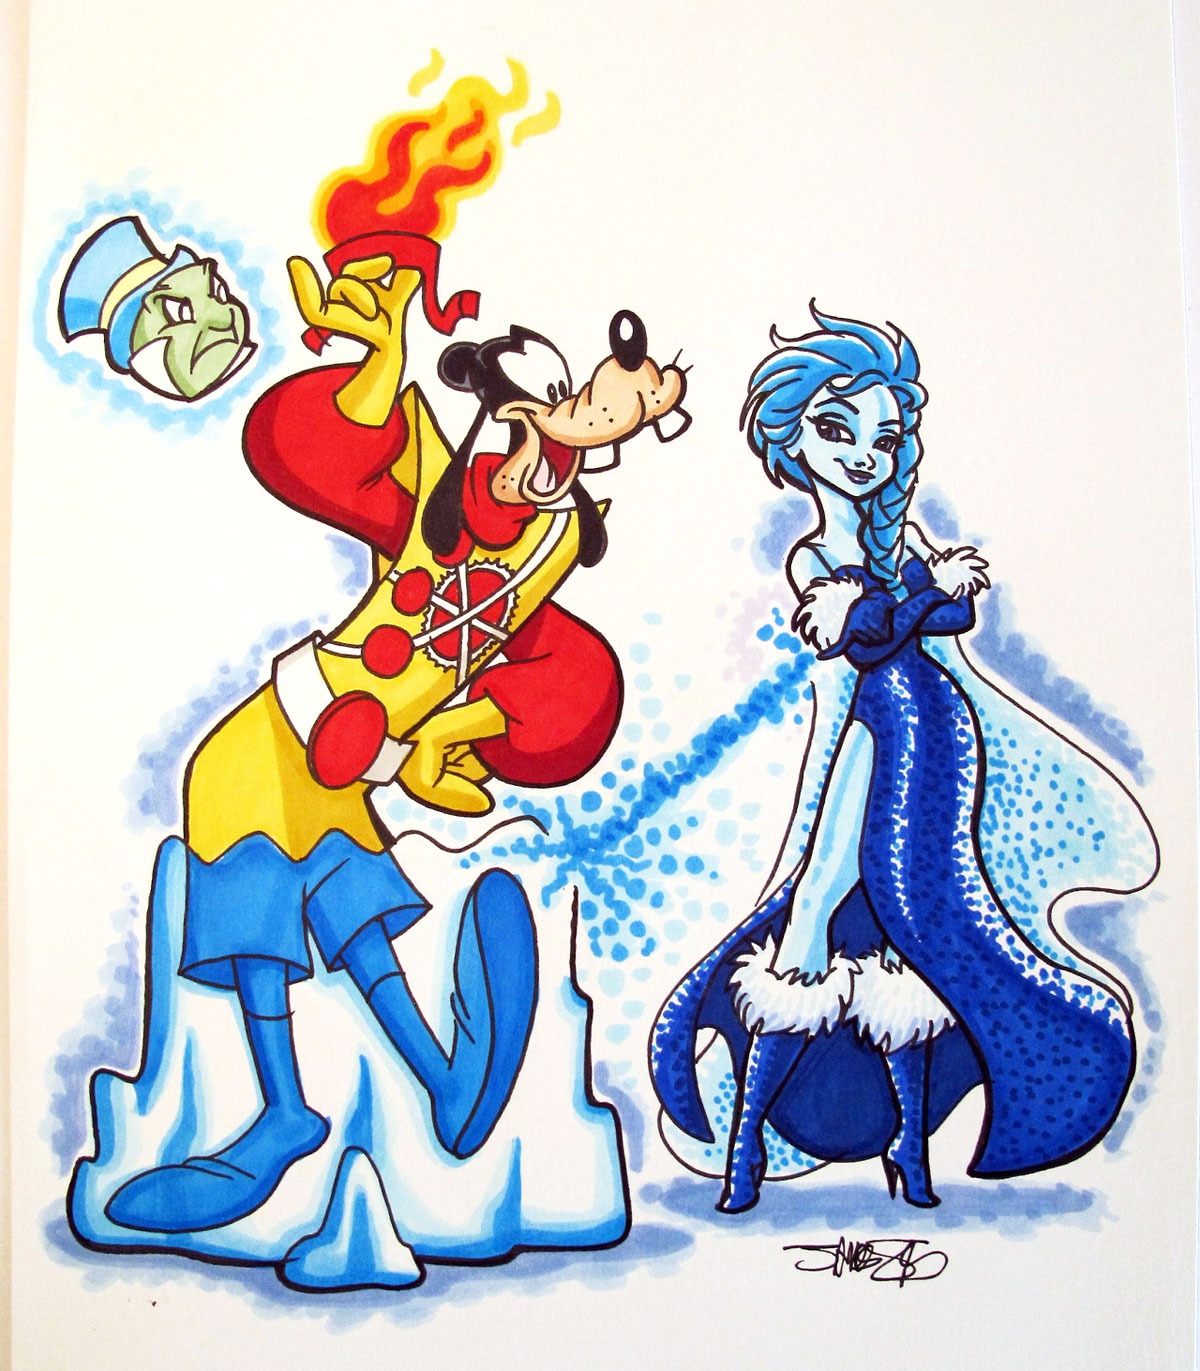 Disney & Firestorm Mash-up featuring Elsa from Frozen as Killer Frost, Goofy as Ronnie Raymond, and Jiminy Cricket as Professor Stein - art by James Silvani